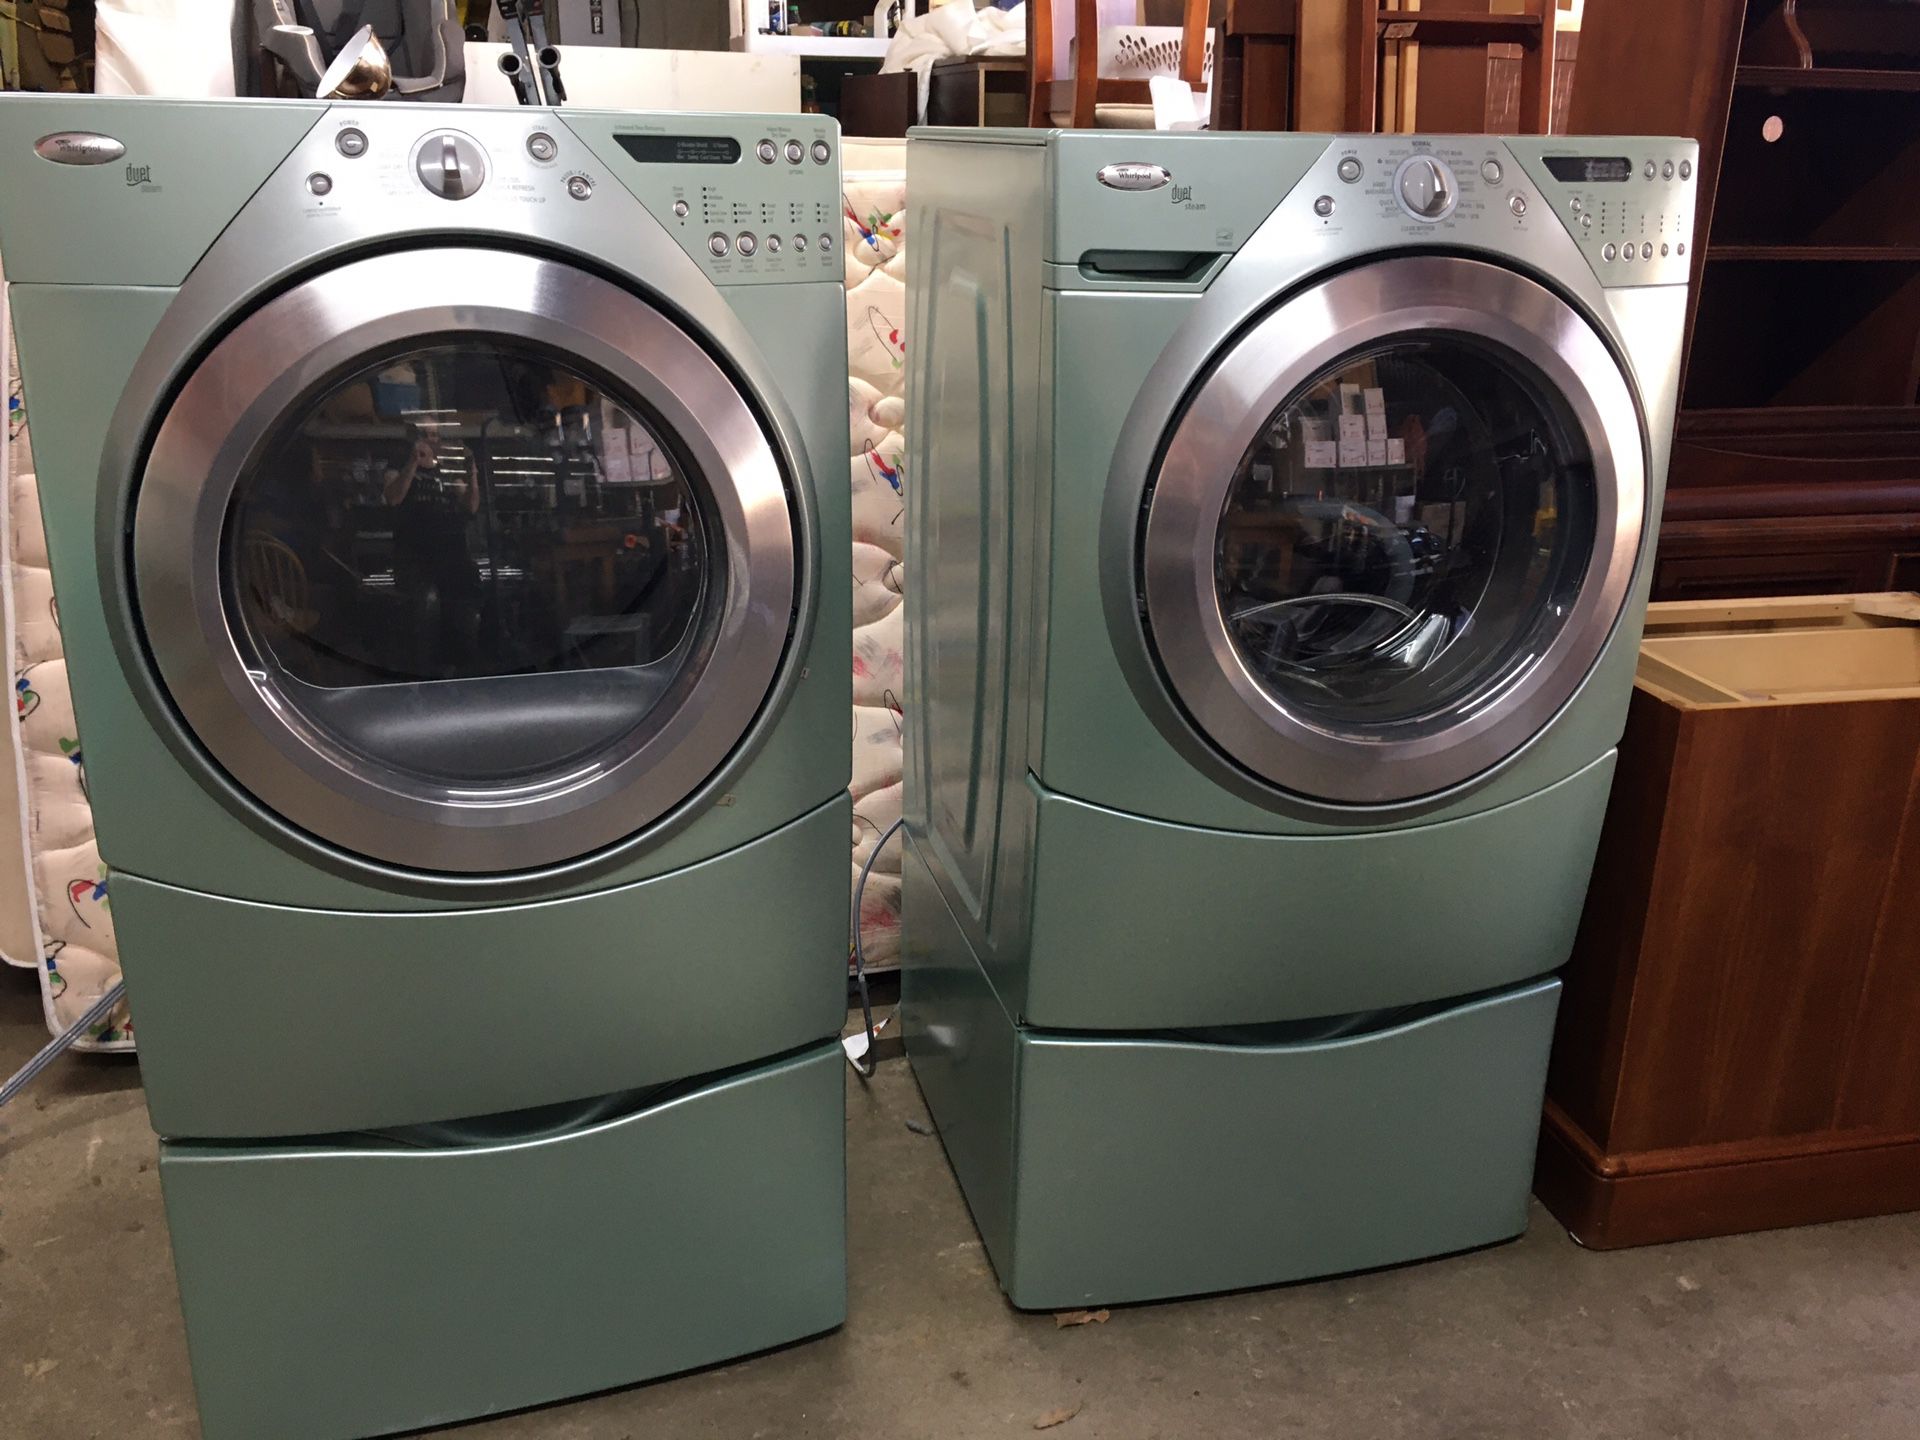 Whirlpool Duet steam washer and dryer